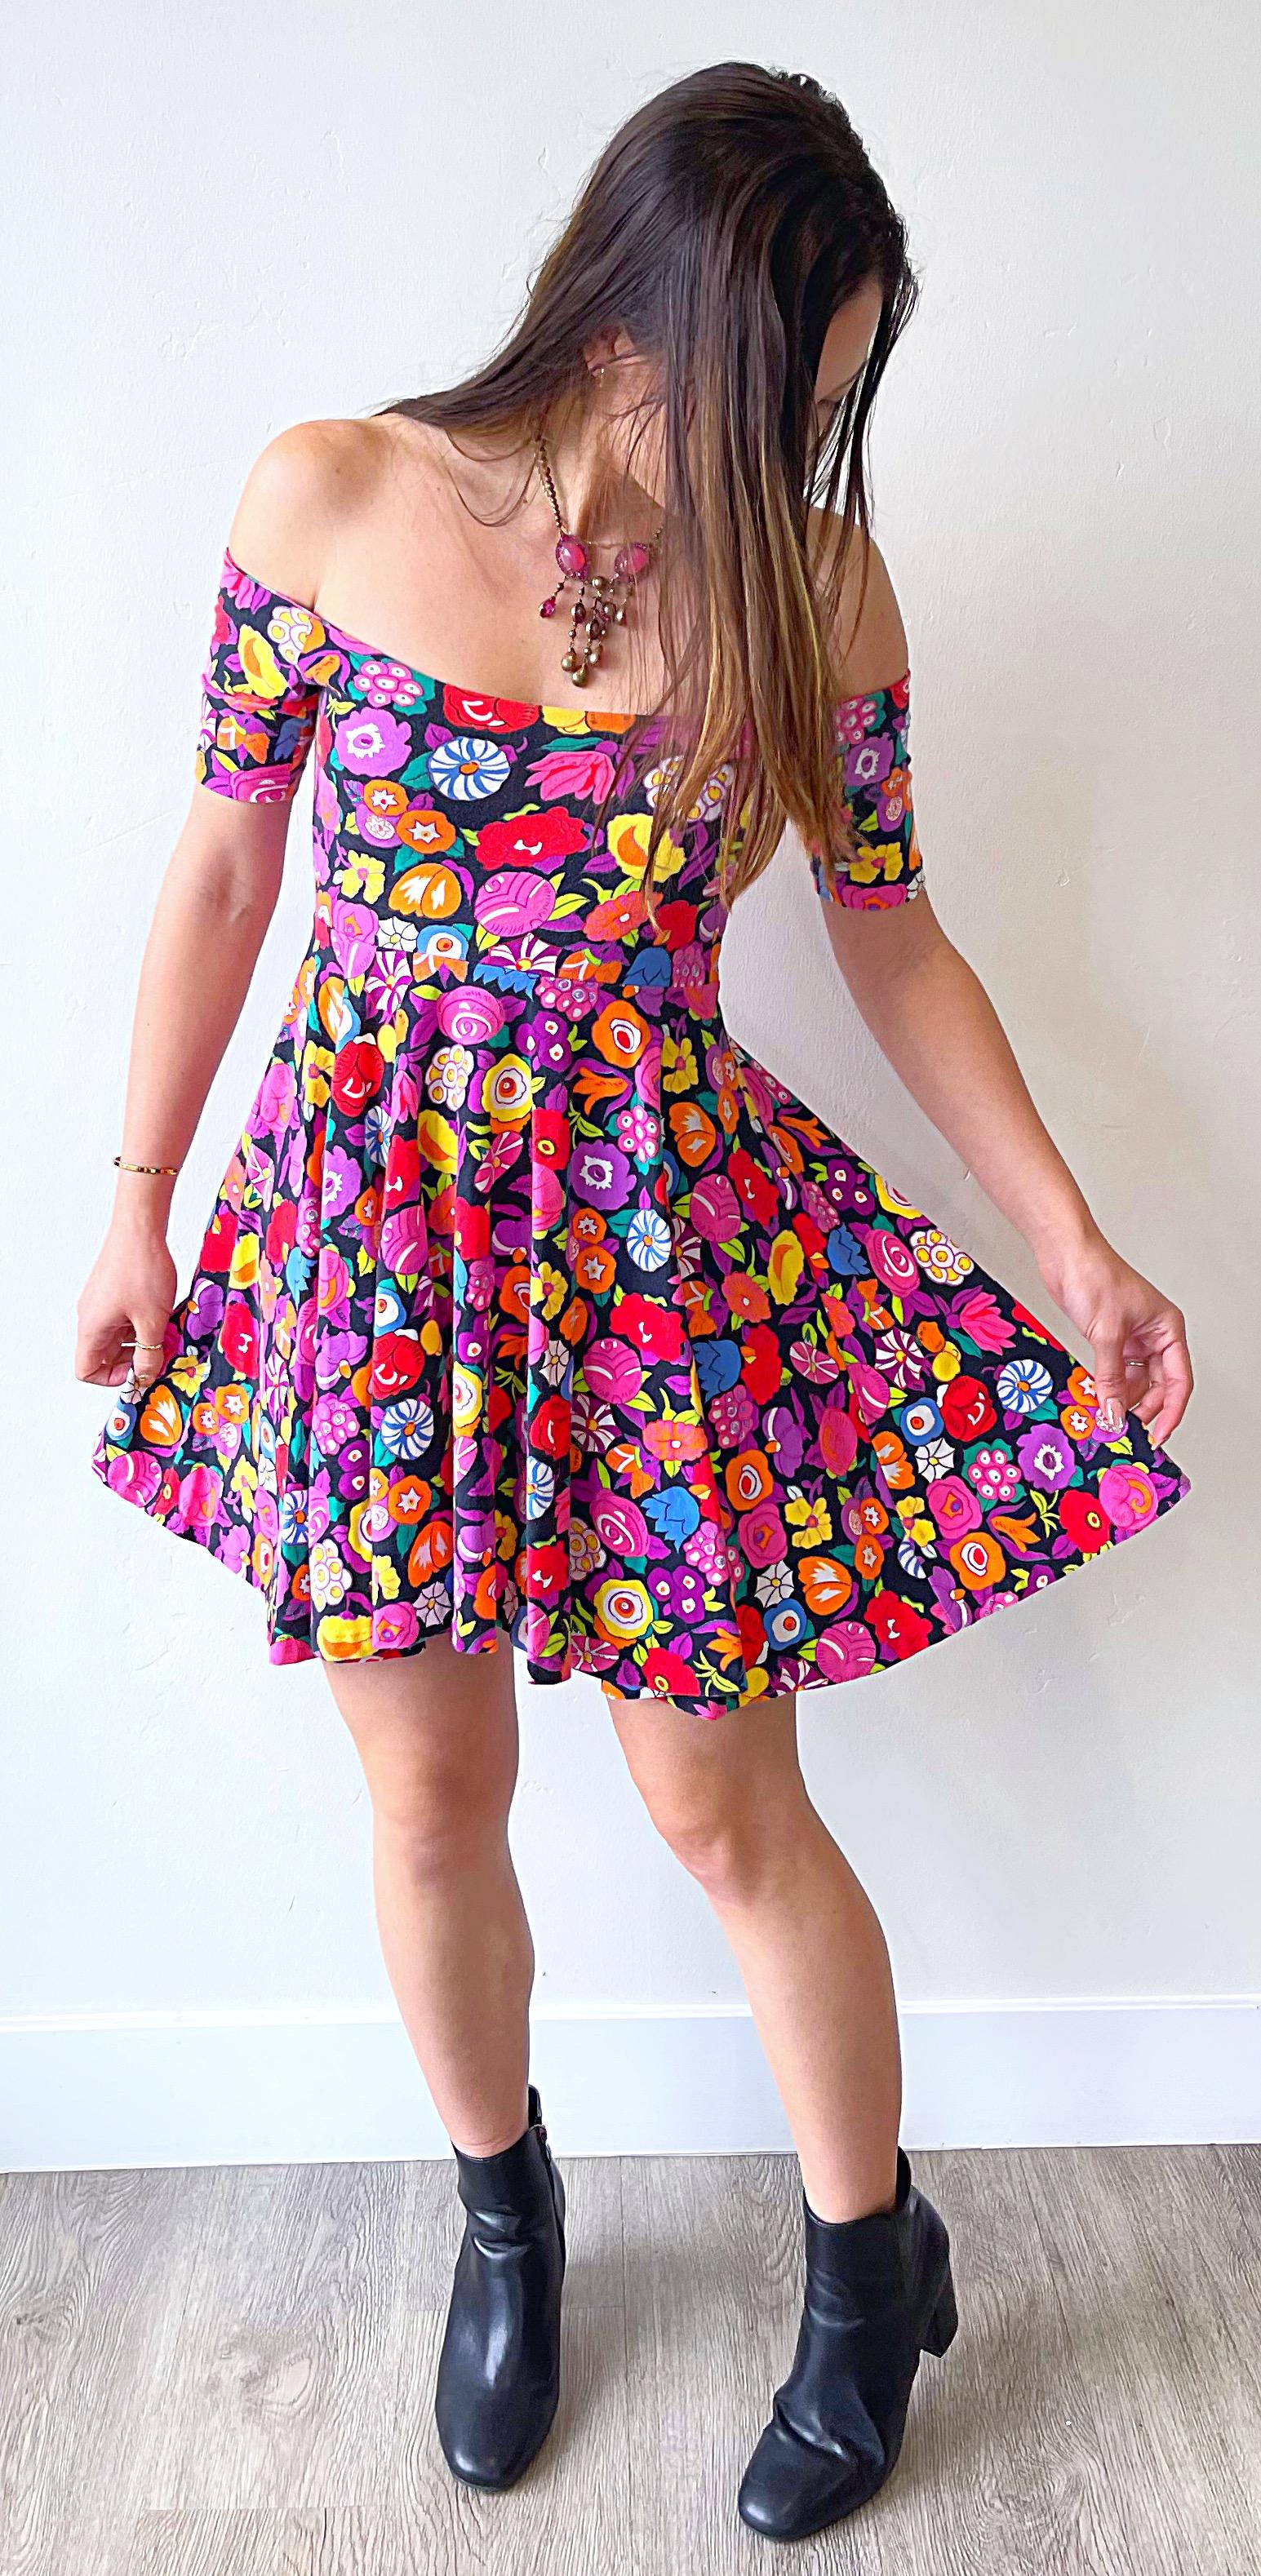 Rare early BETSEY JOHNSON Punk Label 1980s Vintage brightly colored flower print off the shoulder mini dress ! Features bright colors of hot pink, orange, fuchsia, purple, green, yellow, blue, red, black and white throughout. Can also be worn with